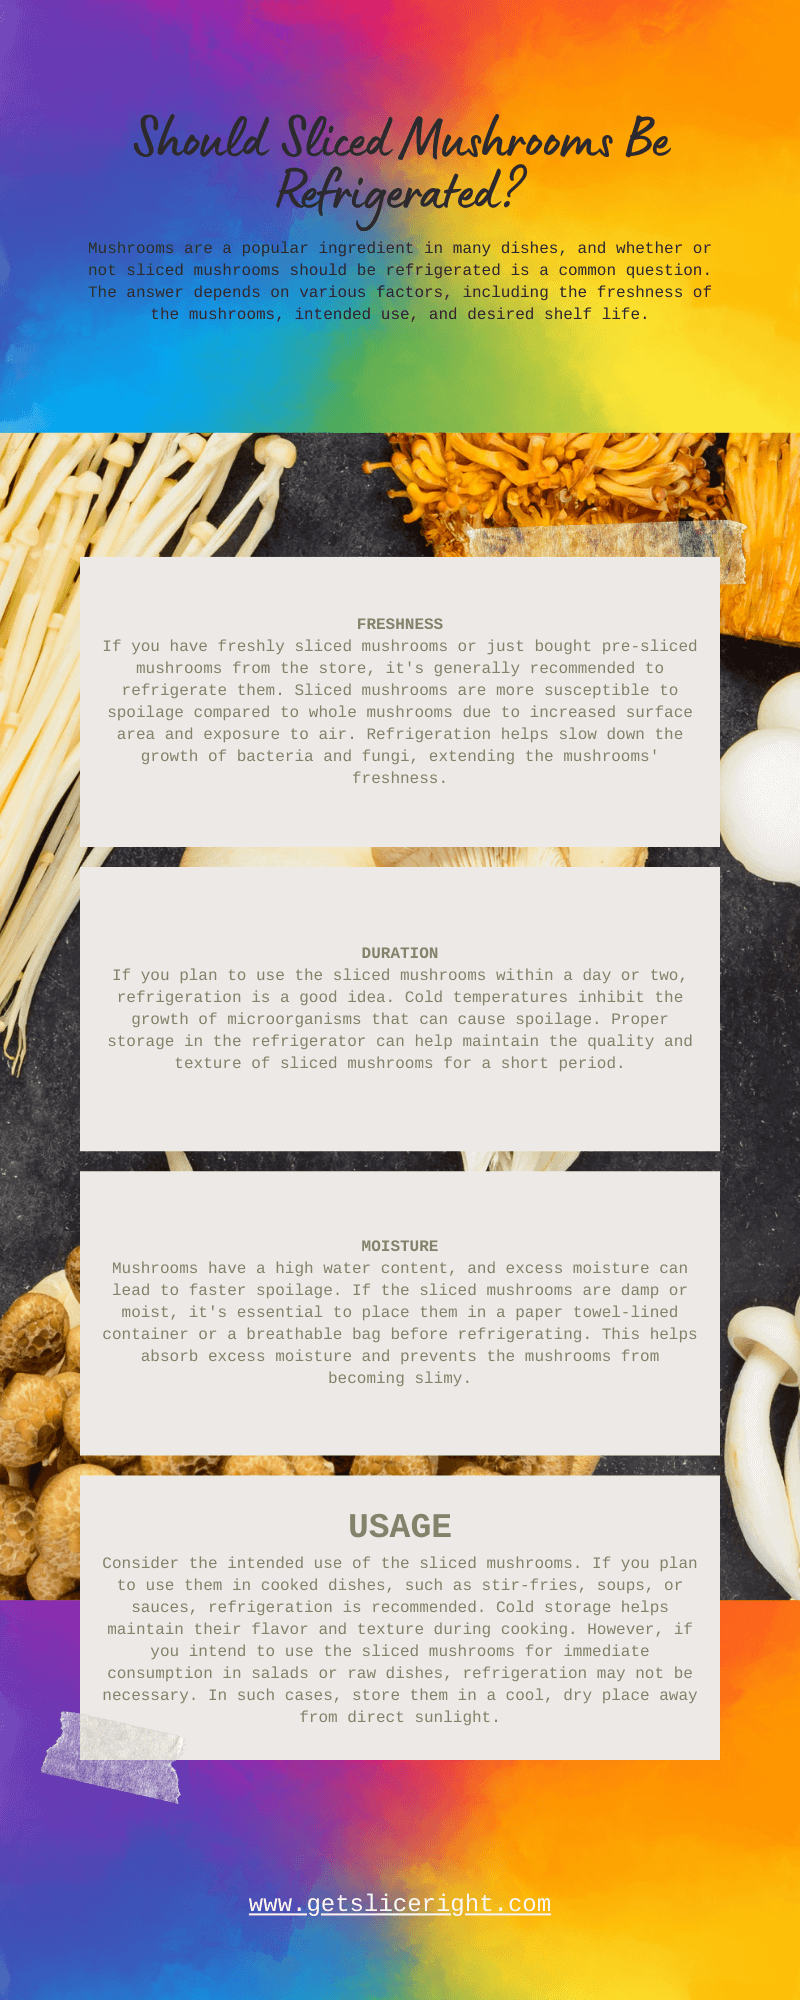 Should sliced mushrooms be refrigerated - infographic